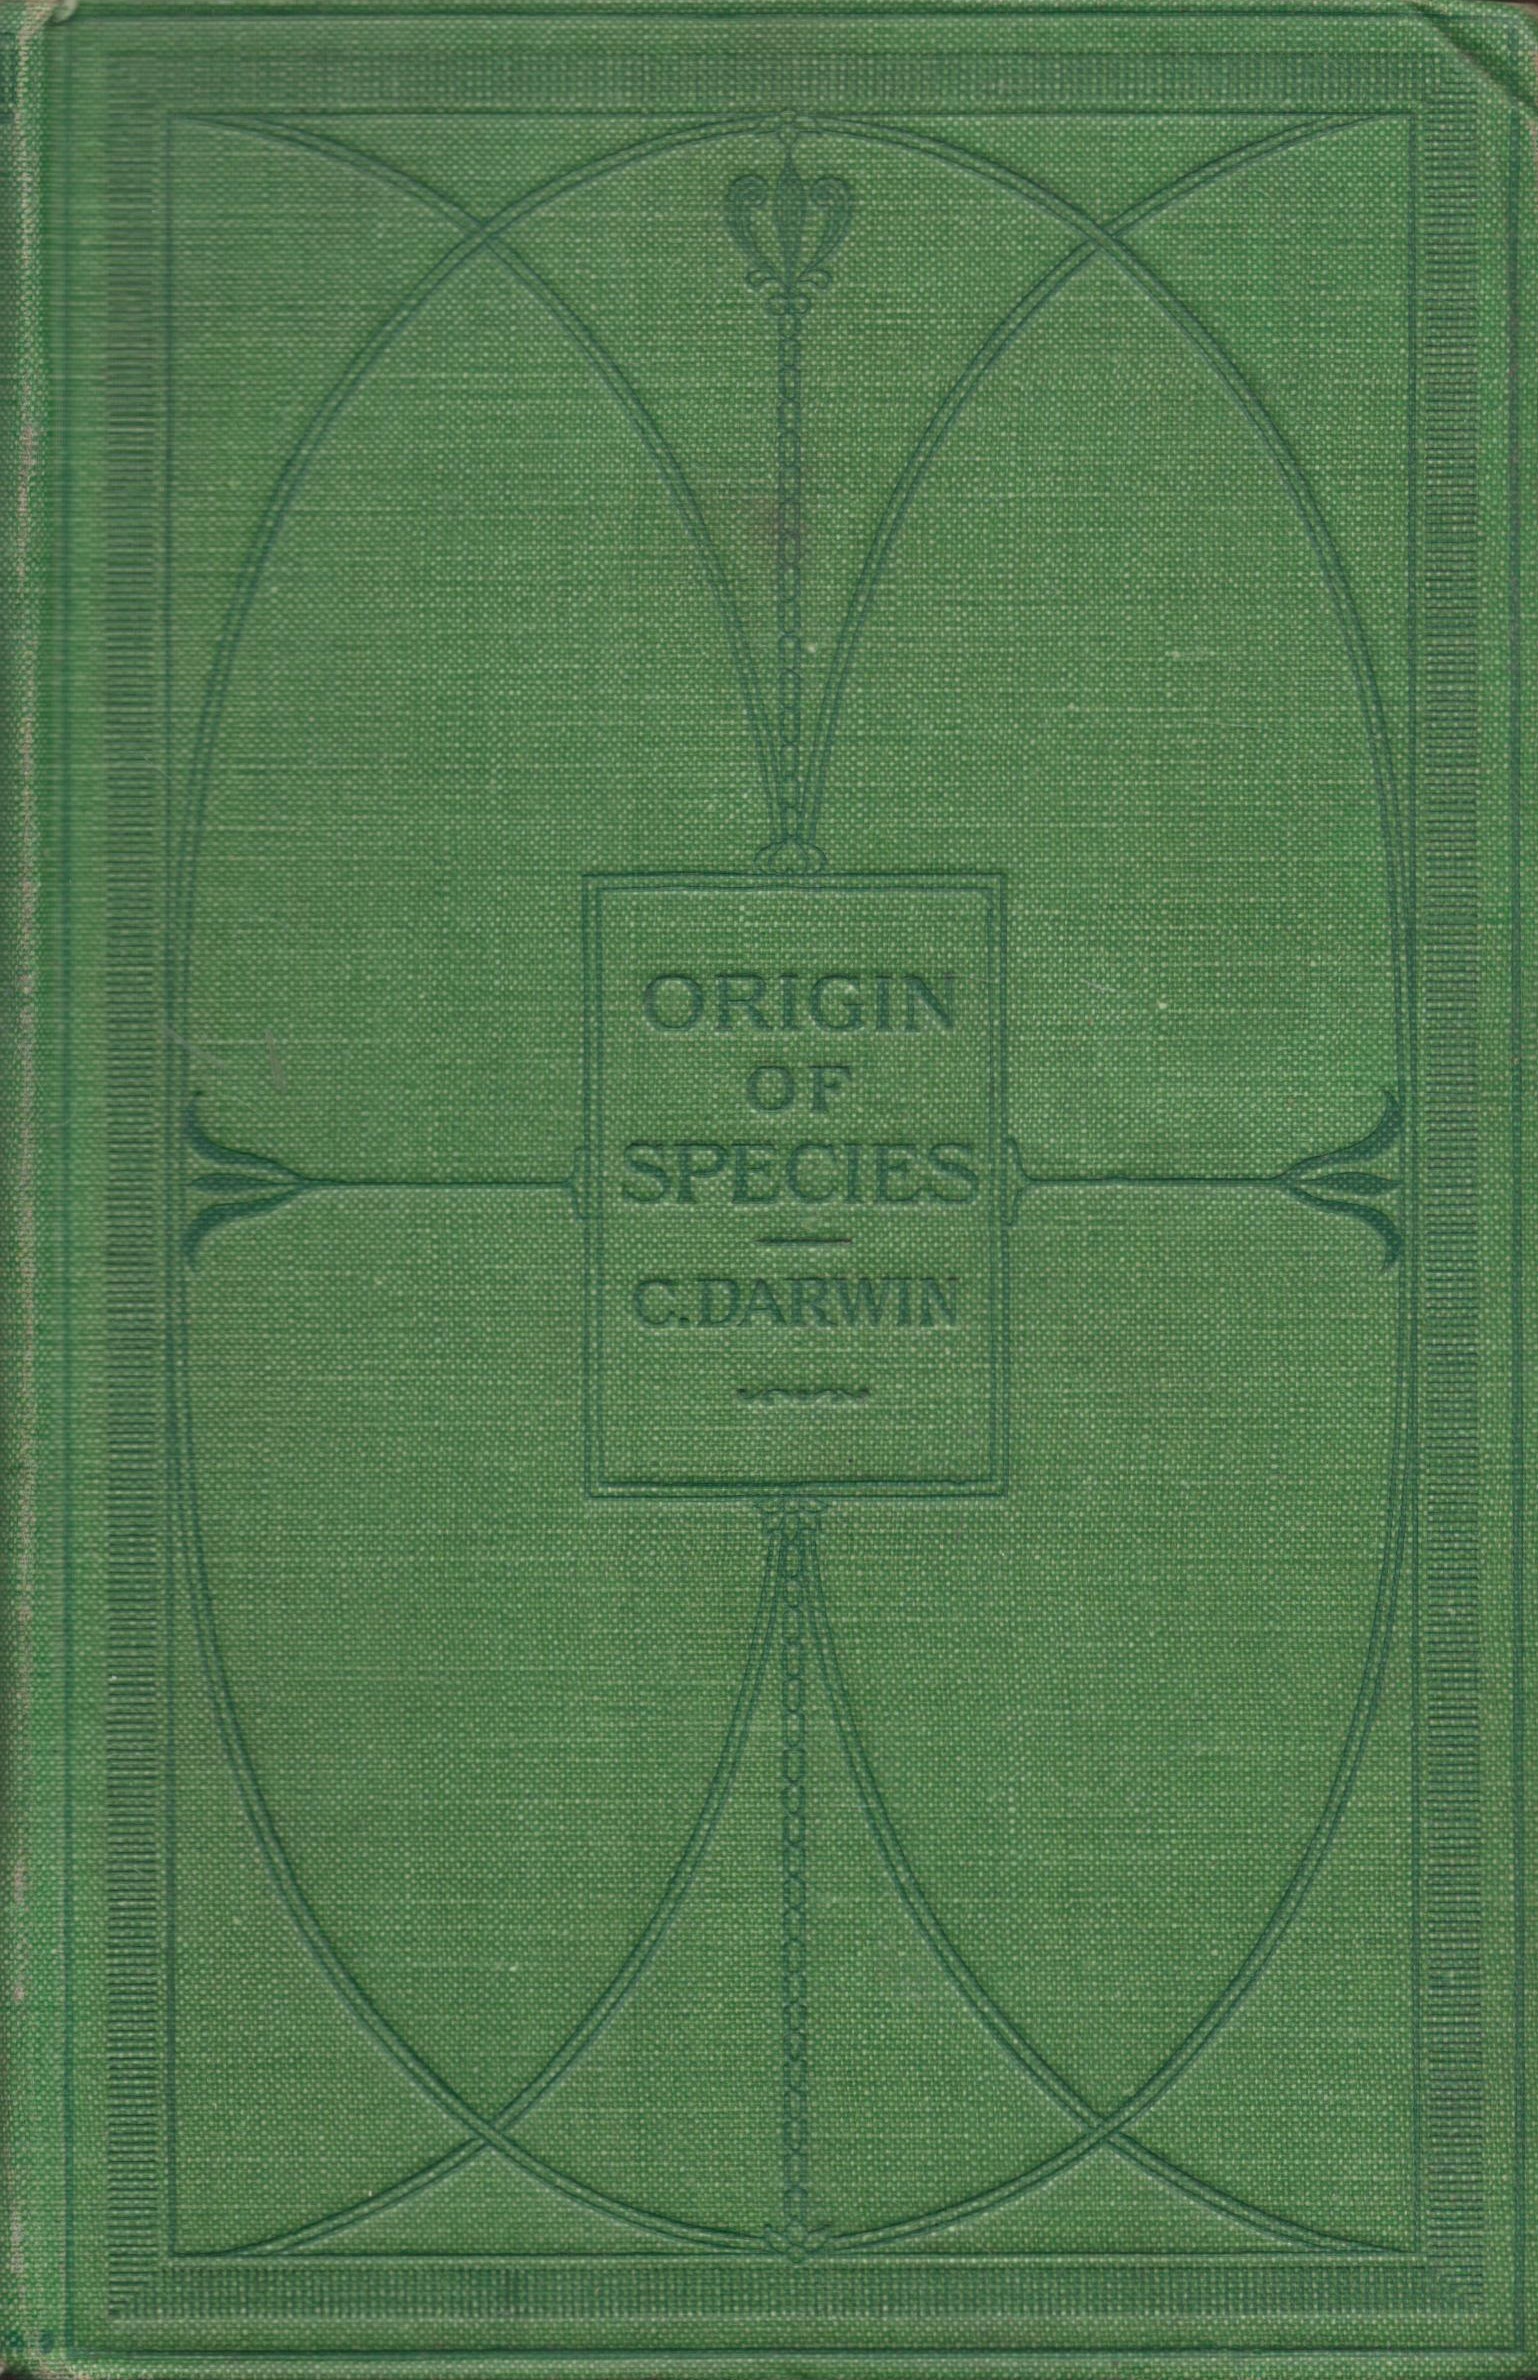 Charles Darwin Hardback Book Titled The Origin Of Species. Published 1906 by John Murray of